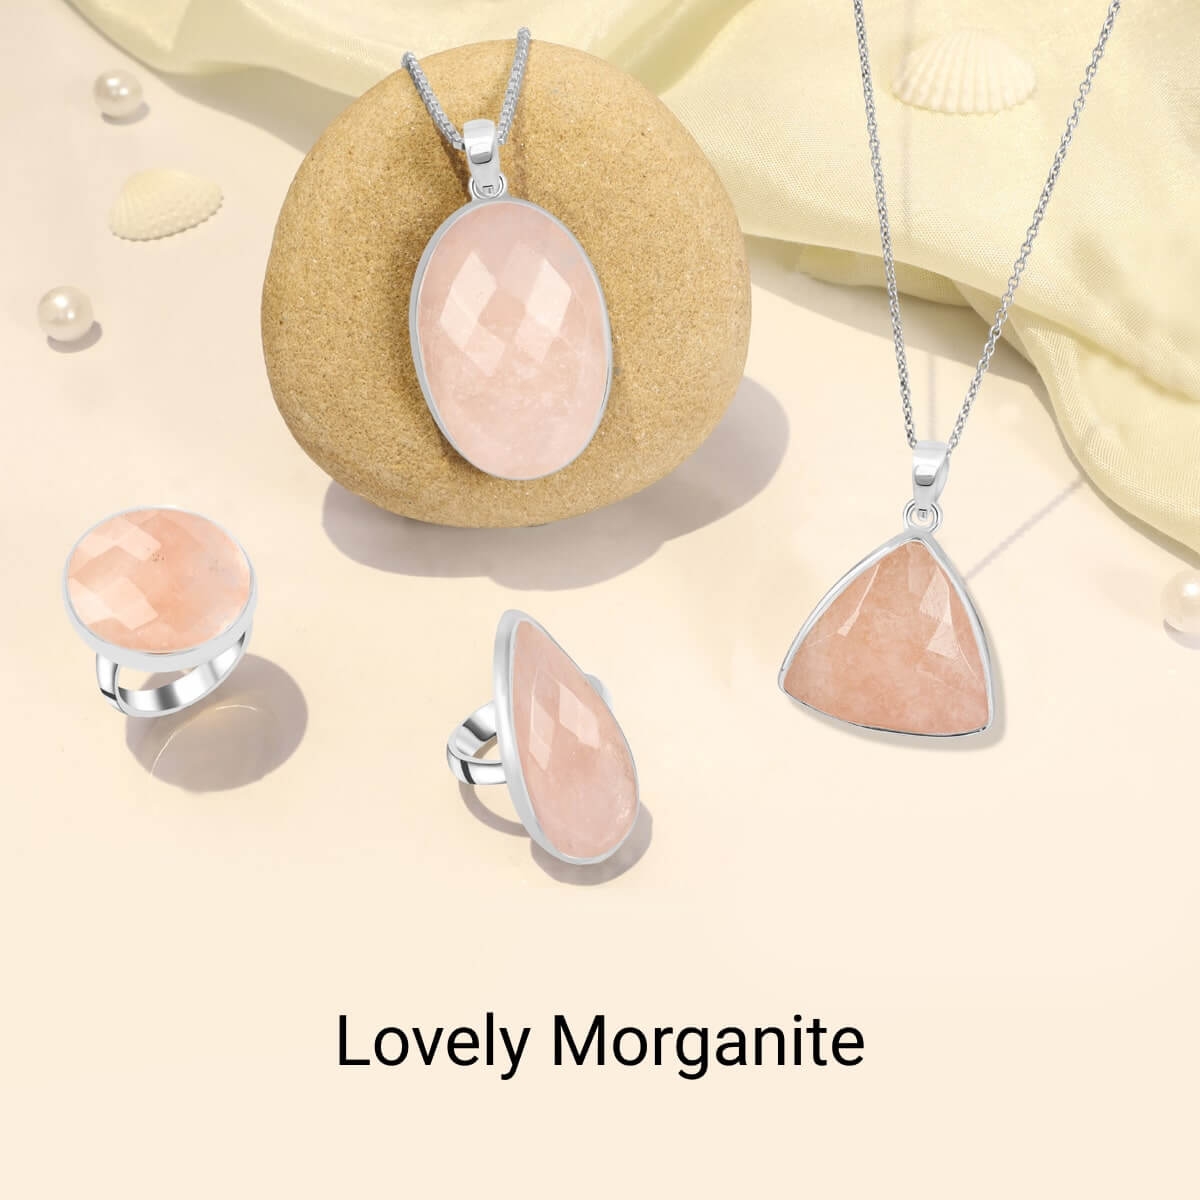 How Will Morganite Help You